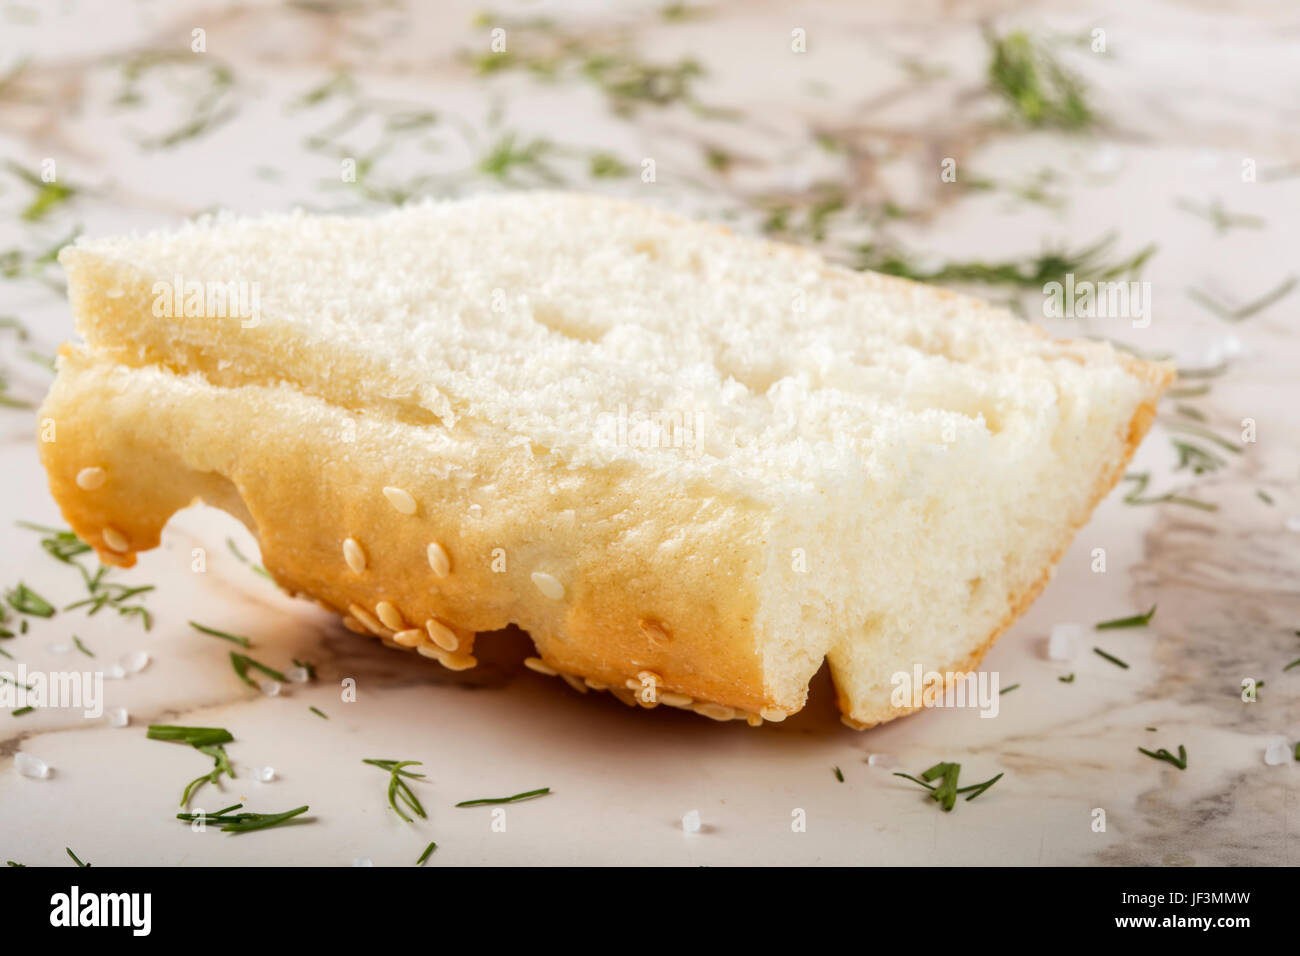 Slice of fresh baguette with sesame on table with herbs and sea salt Stock Photo